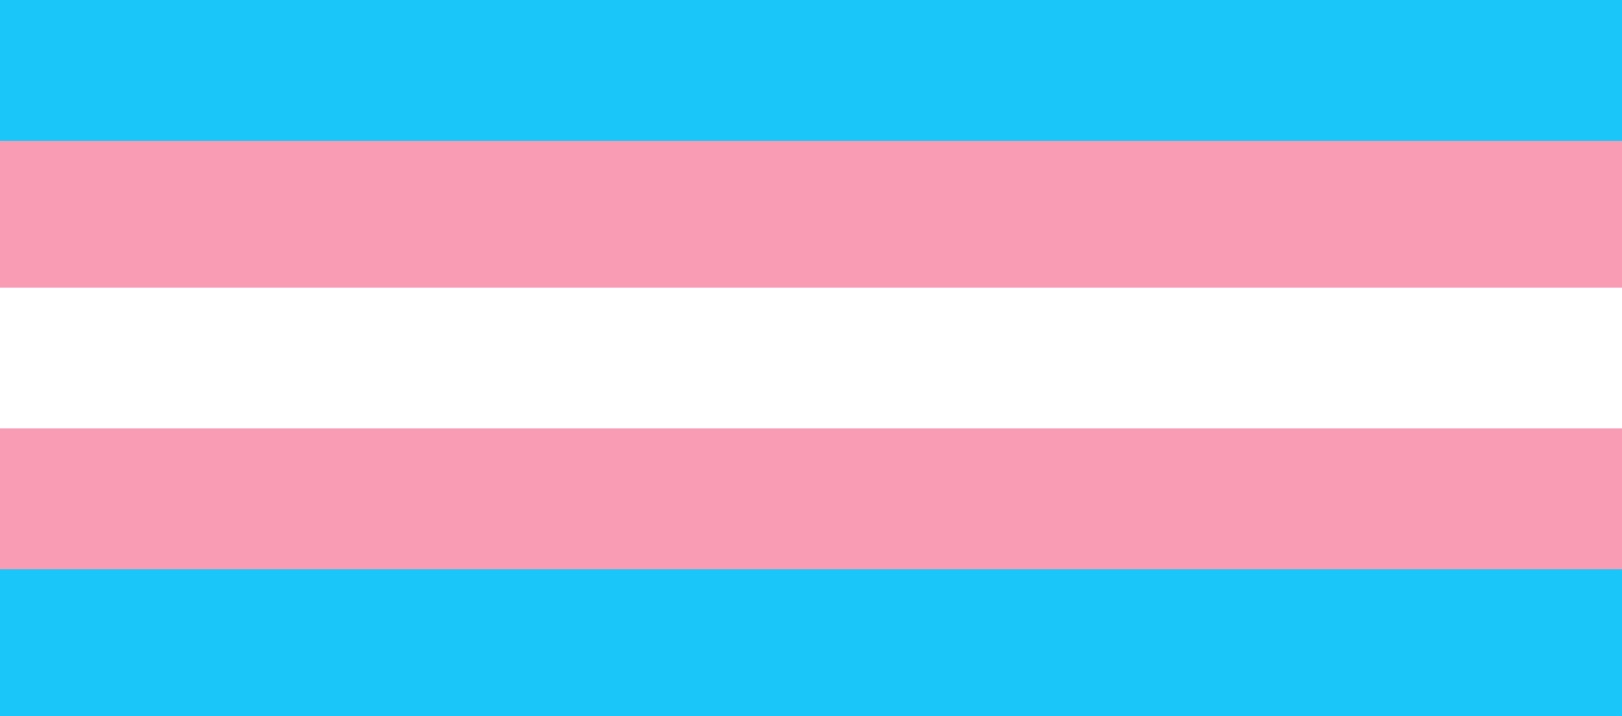 4 Ways to Support Transgender and Gender Non-Conforming Employees